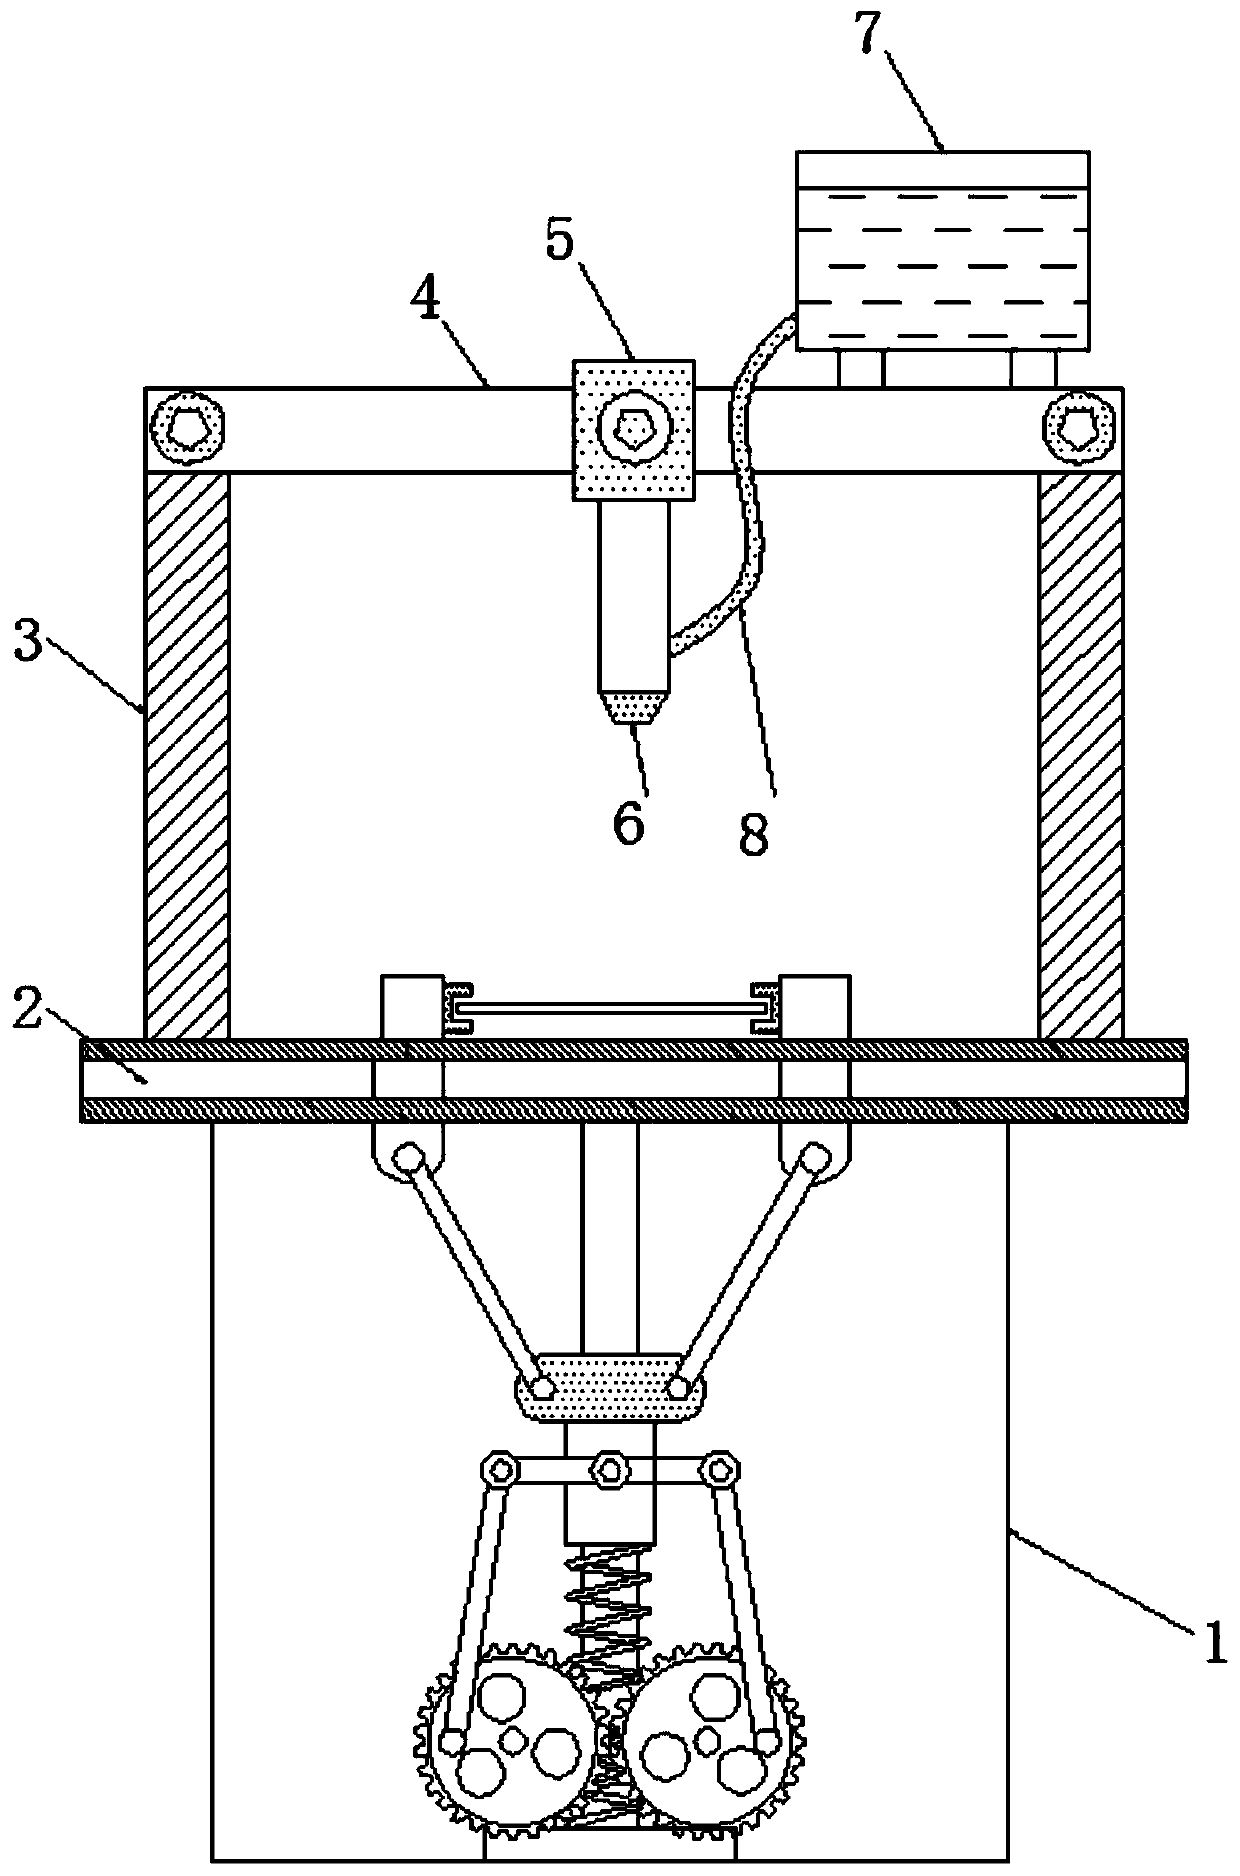 Face-to-face movement-based coating device capable of changing clamping size and changing capacity